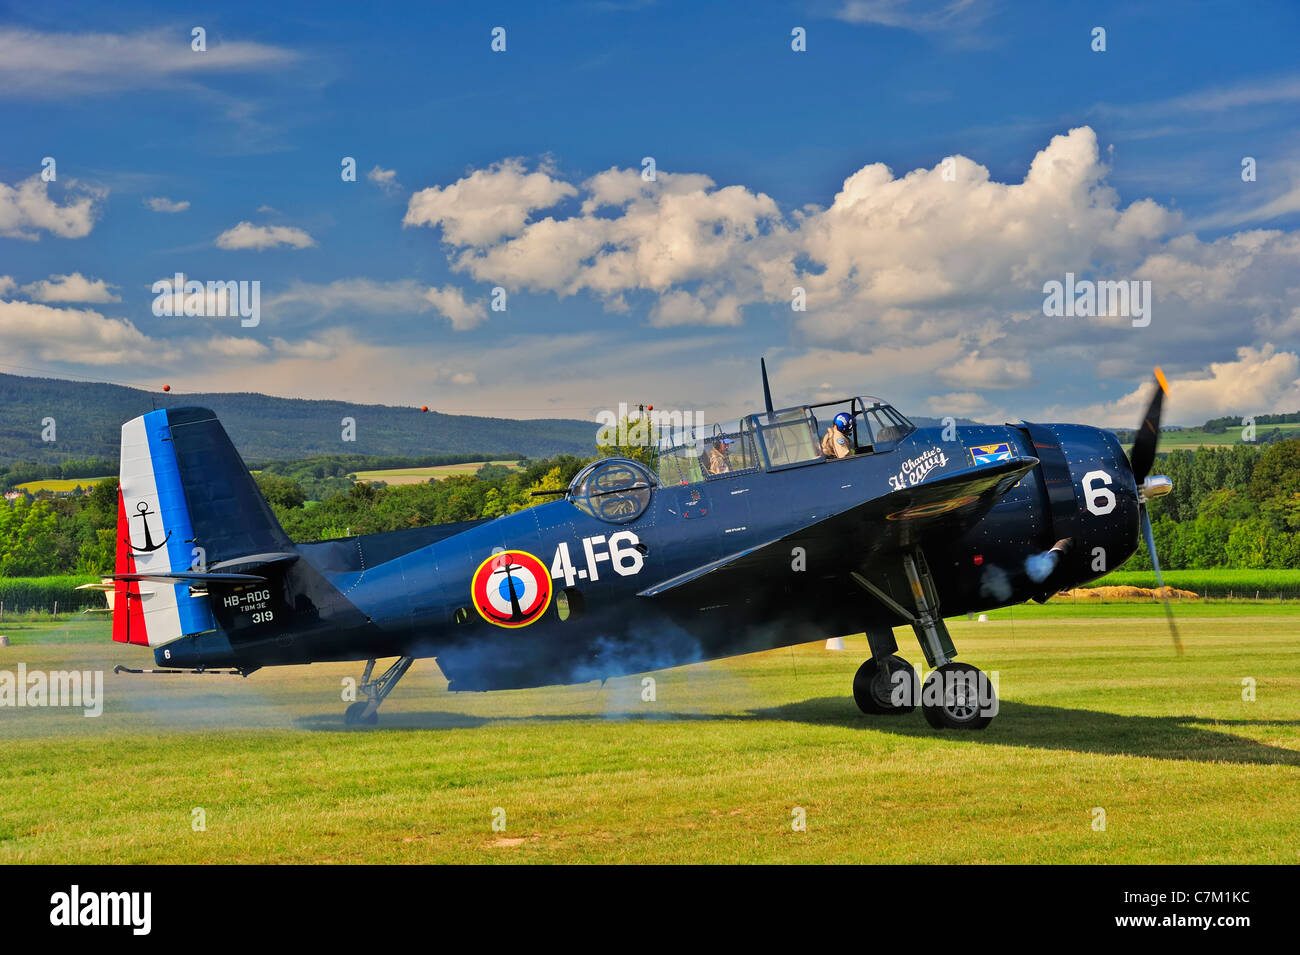 An historic Grumman TBM-3E 'Avenger' torpedo bomber starting up its engines (see puff of smoke) ready for take-off Stock Photo